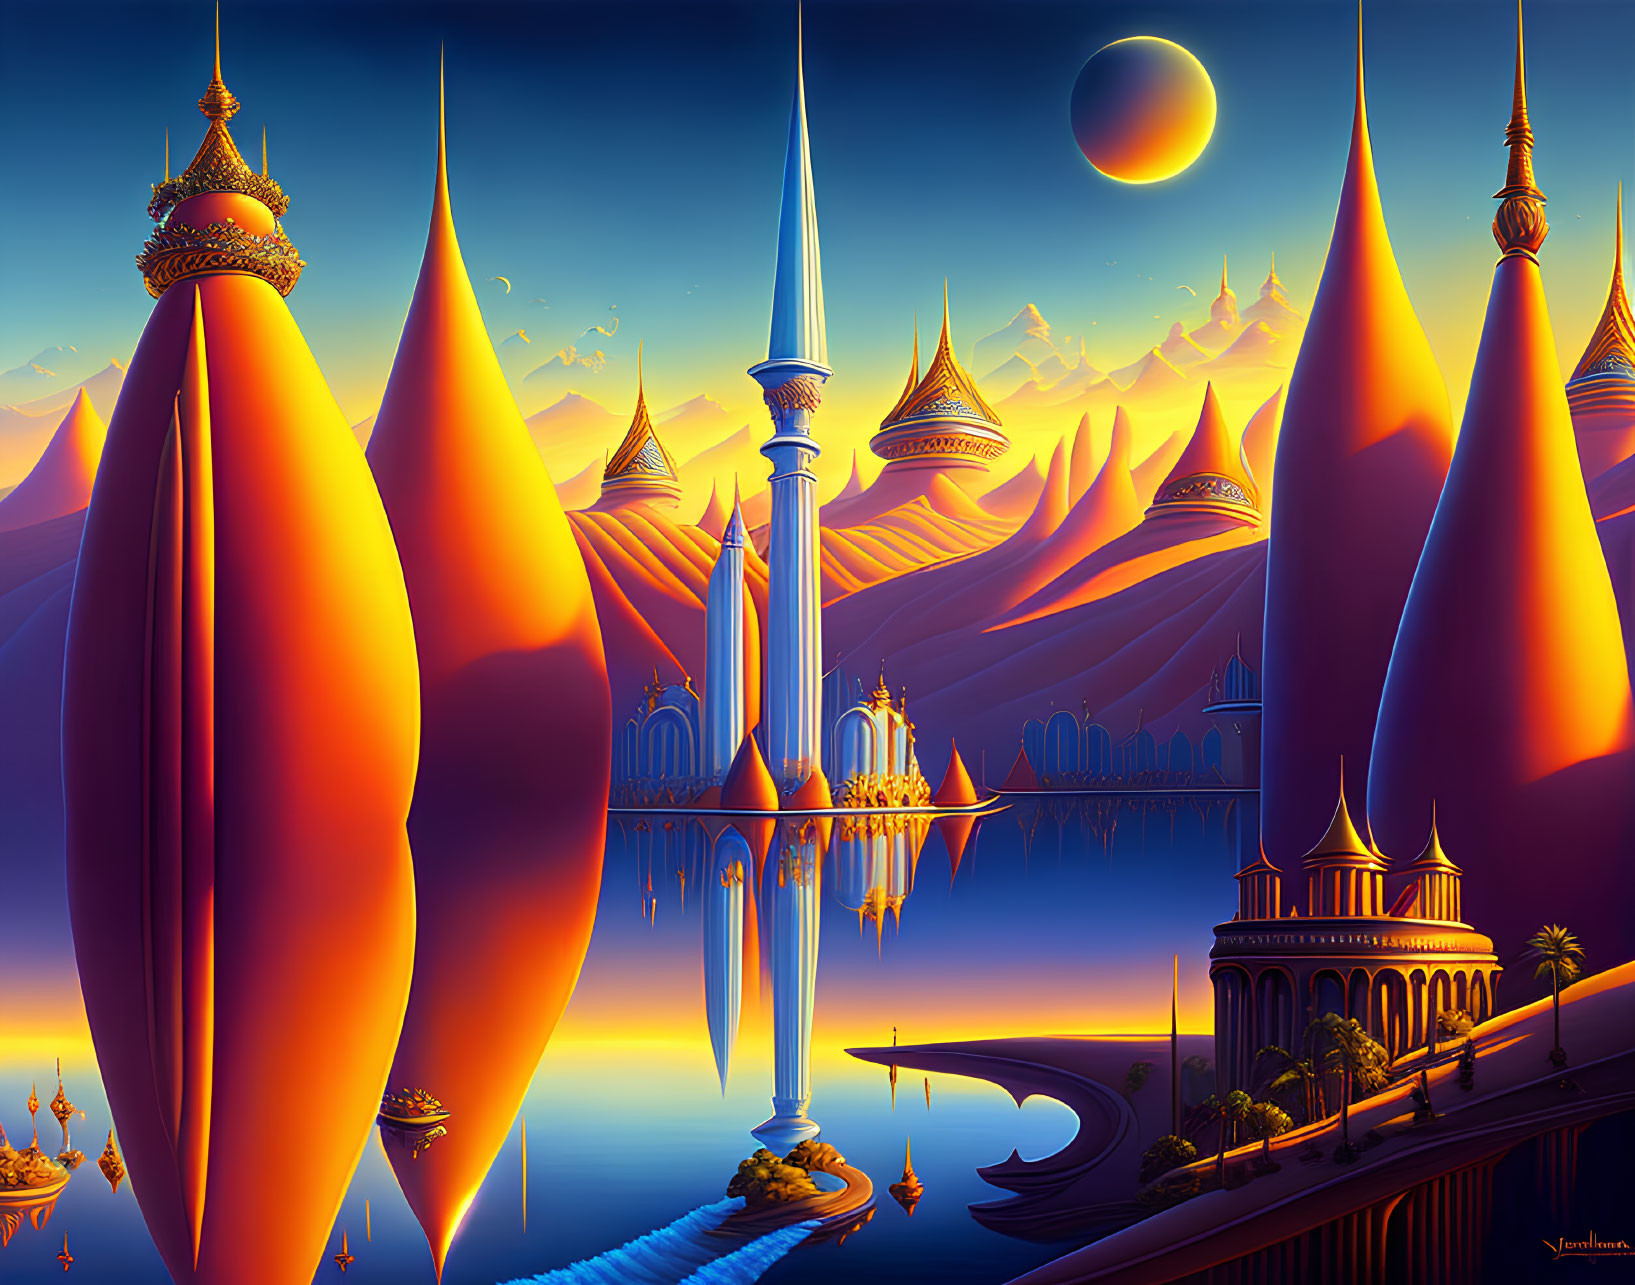 Fantasy landscape with stylized architecture and orange sky